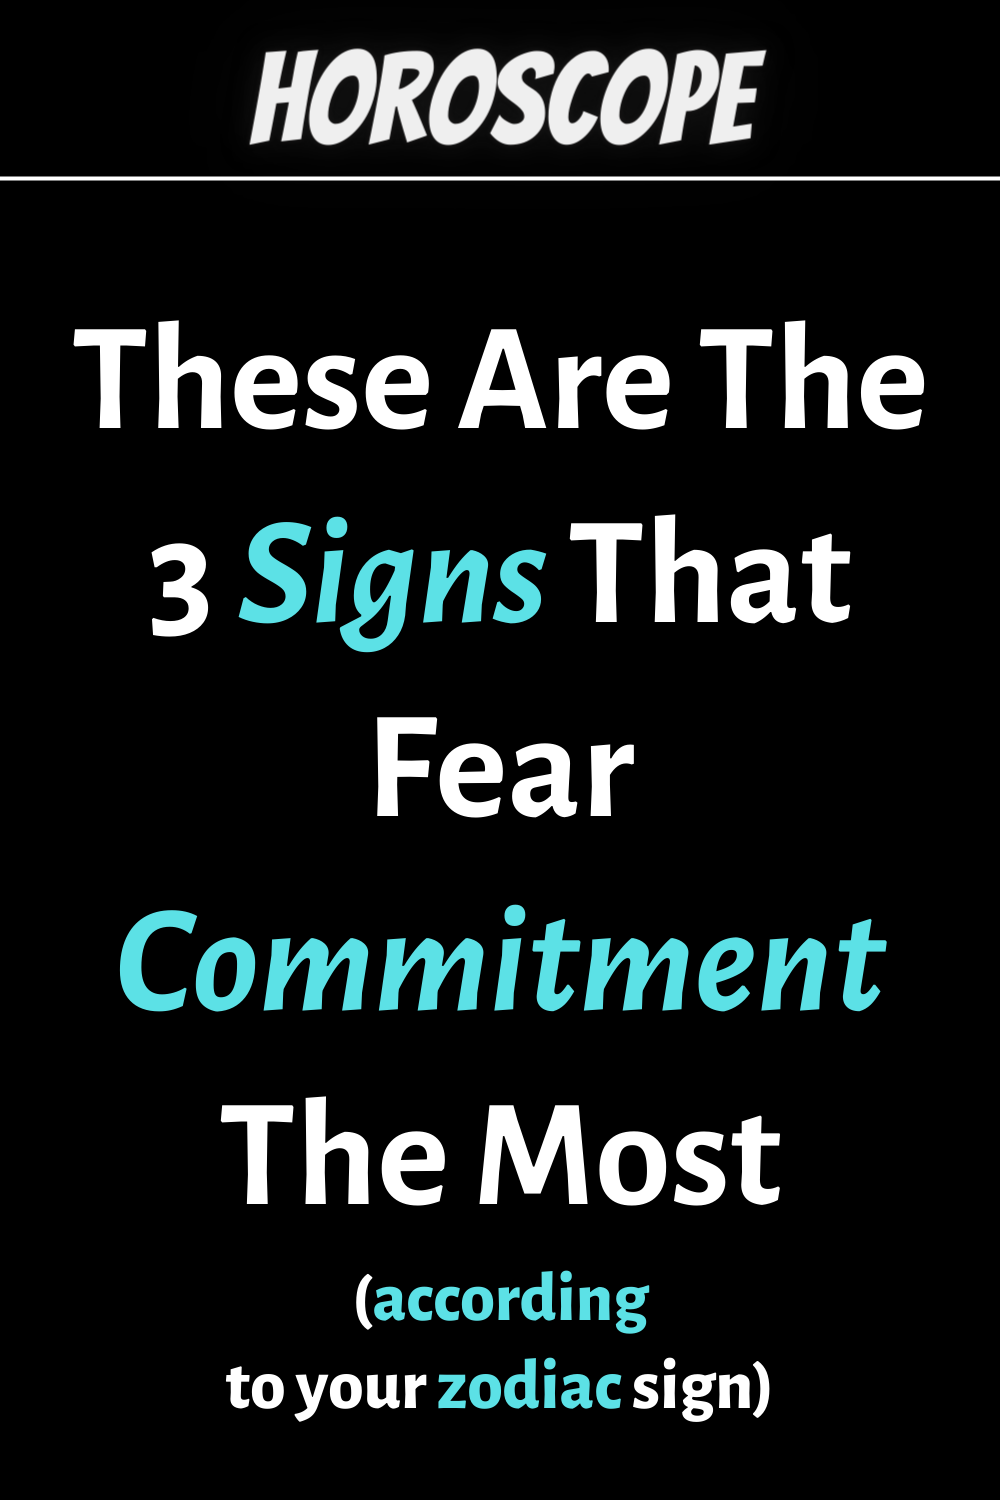 These Are The 3 Signs That Fear Commitment The Most